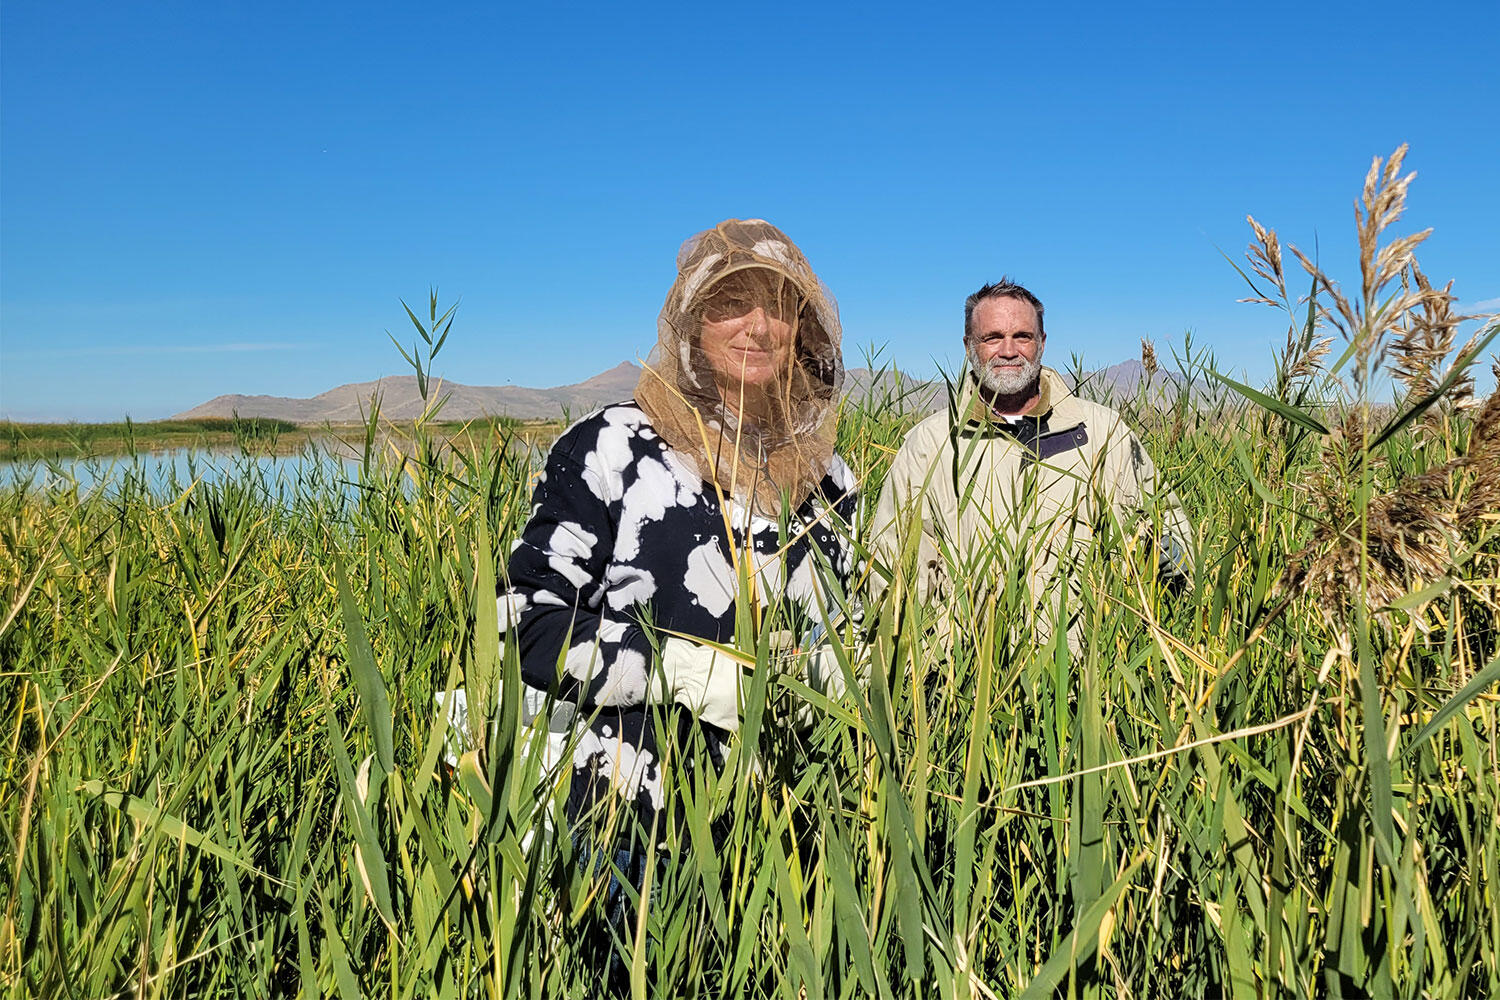 Two adults stand in thick, wait-high vegetation. They are smiling at the camera. One is wearing a bug net.